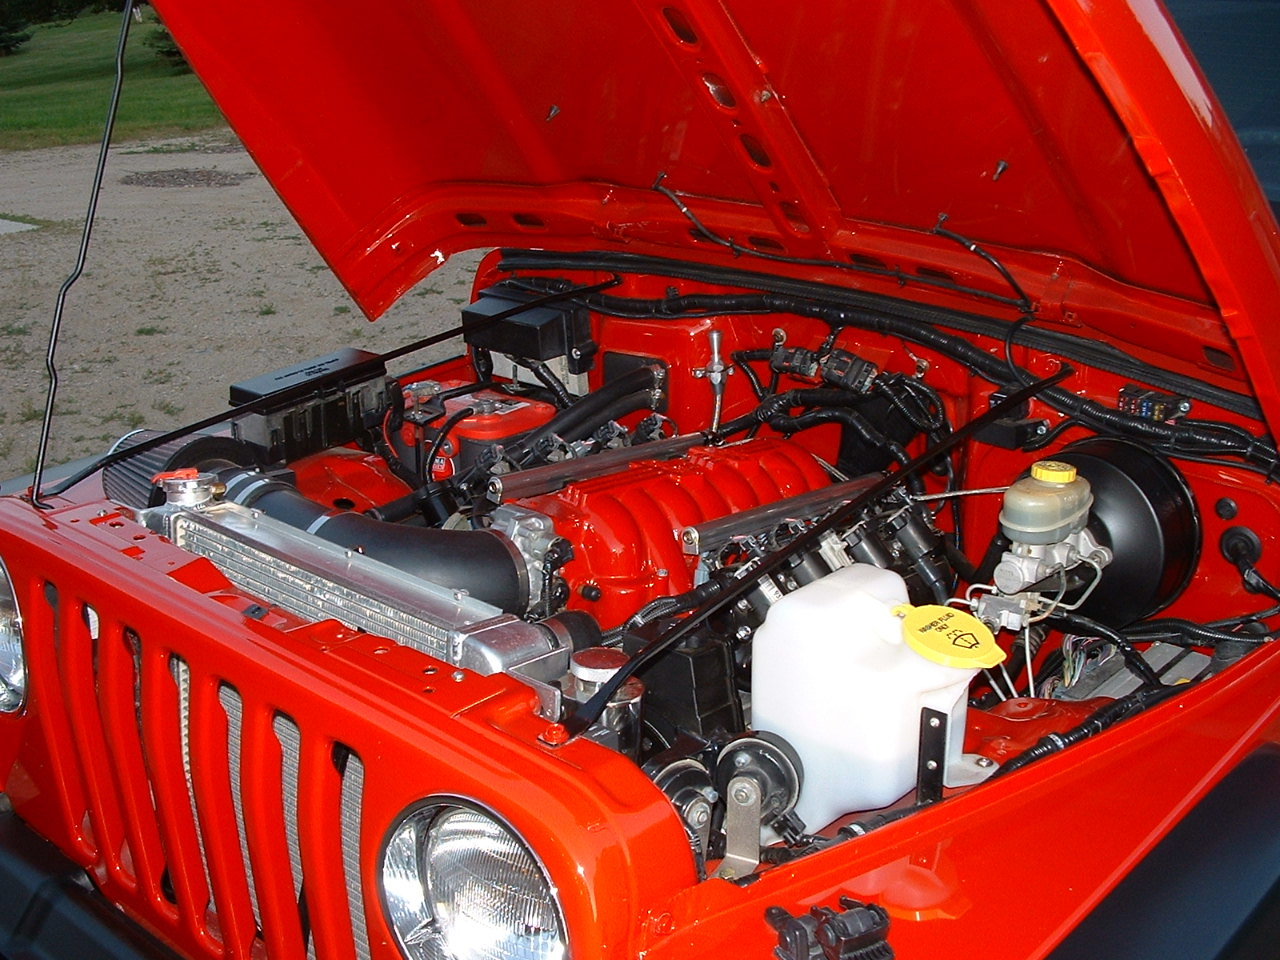 Hooker Blackheart Jeep YJ LS and LT Engine Swap Systems Thread - LS1TECH -  Camaro and Firebird Forum Discussion